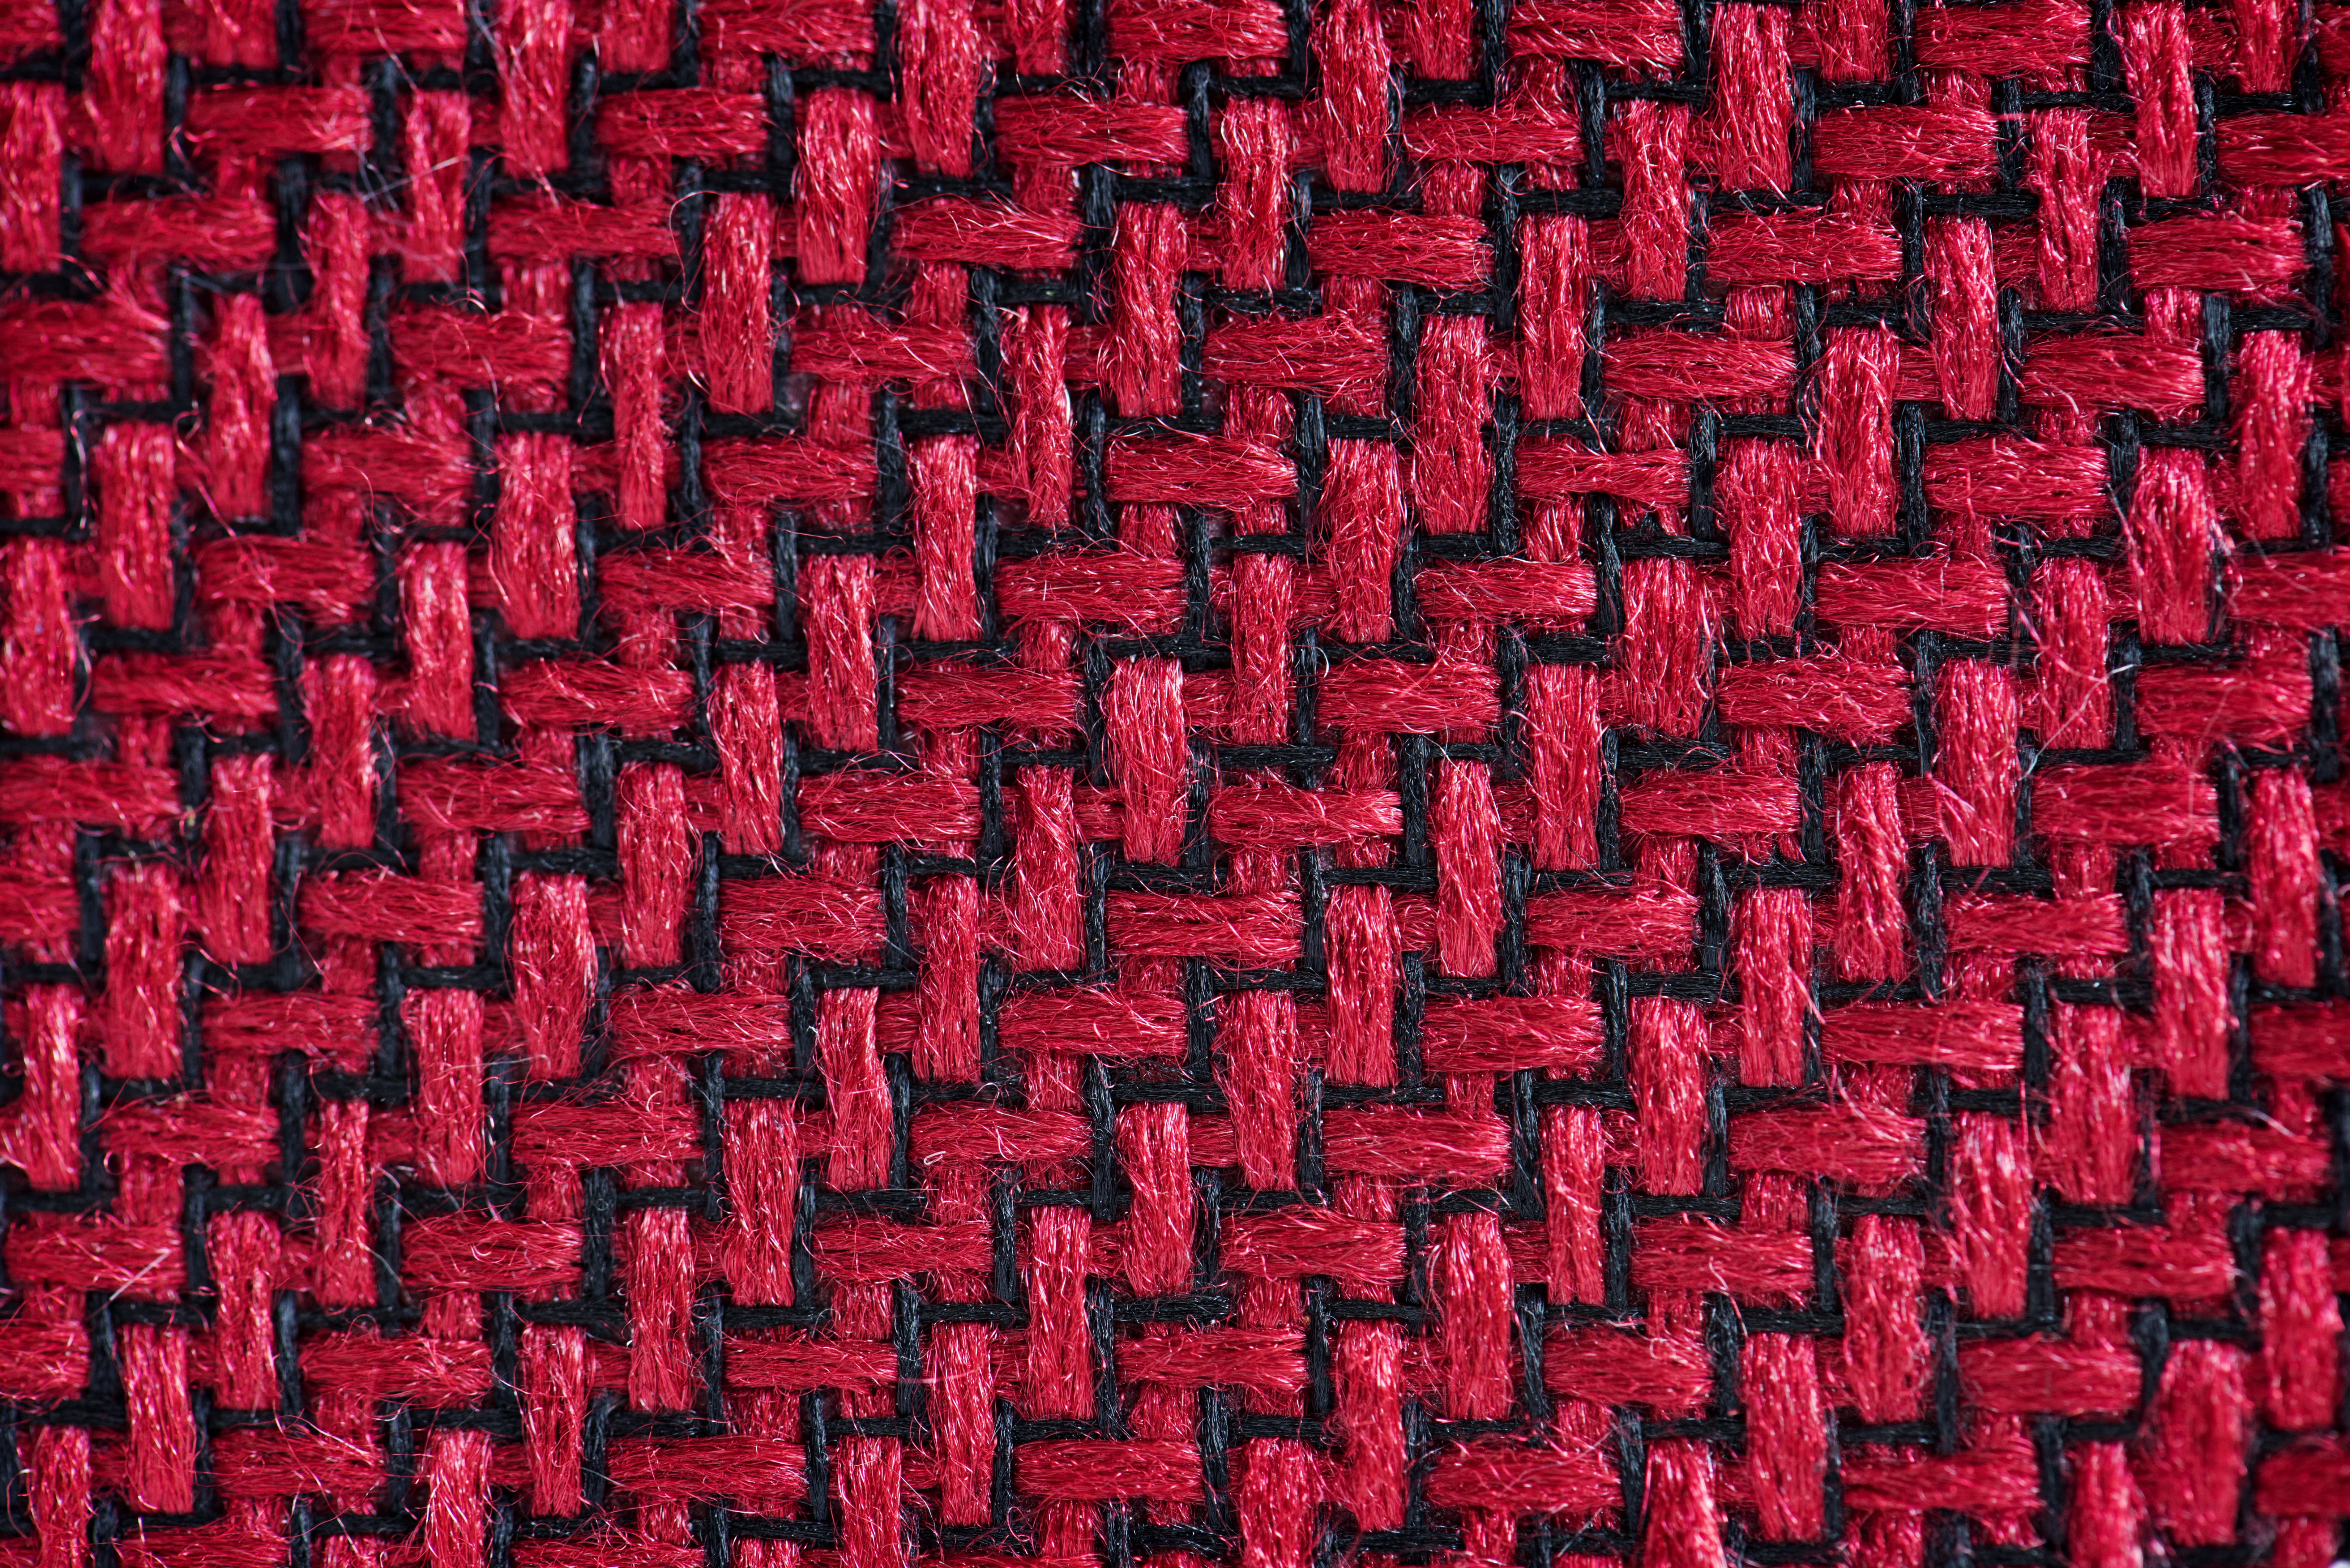 red and black woven